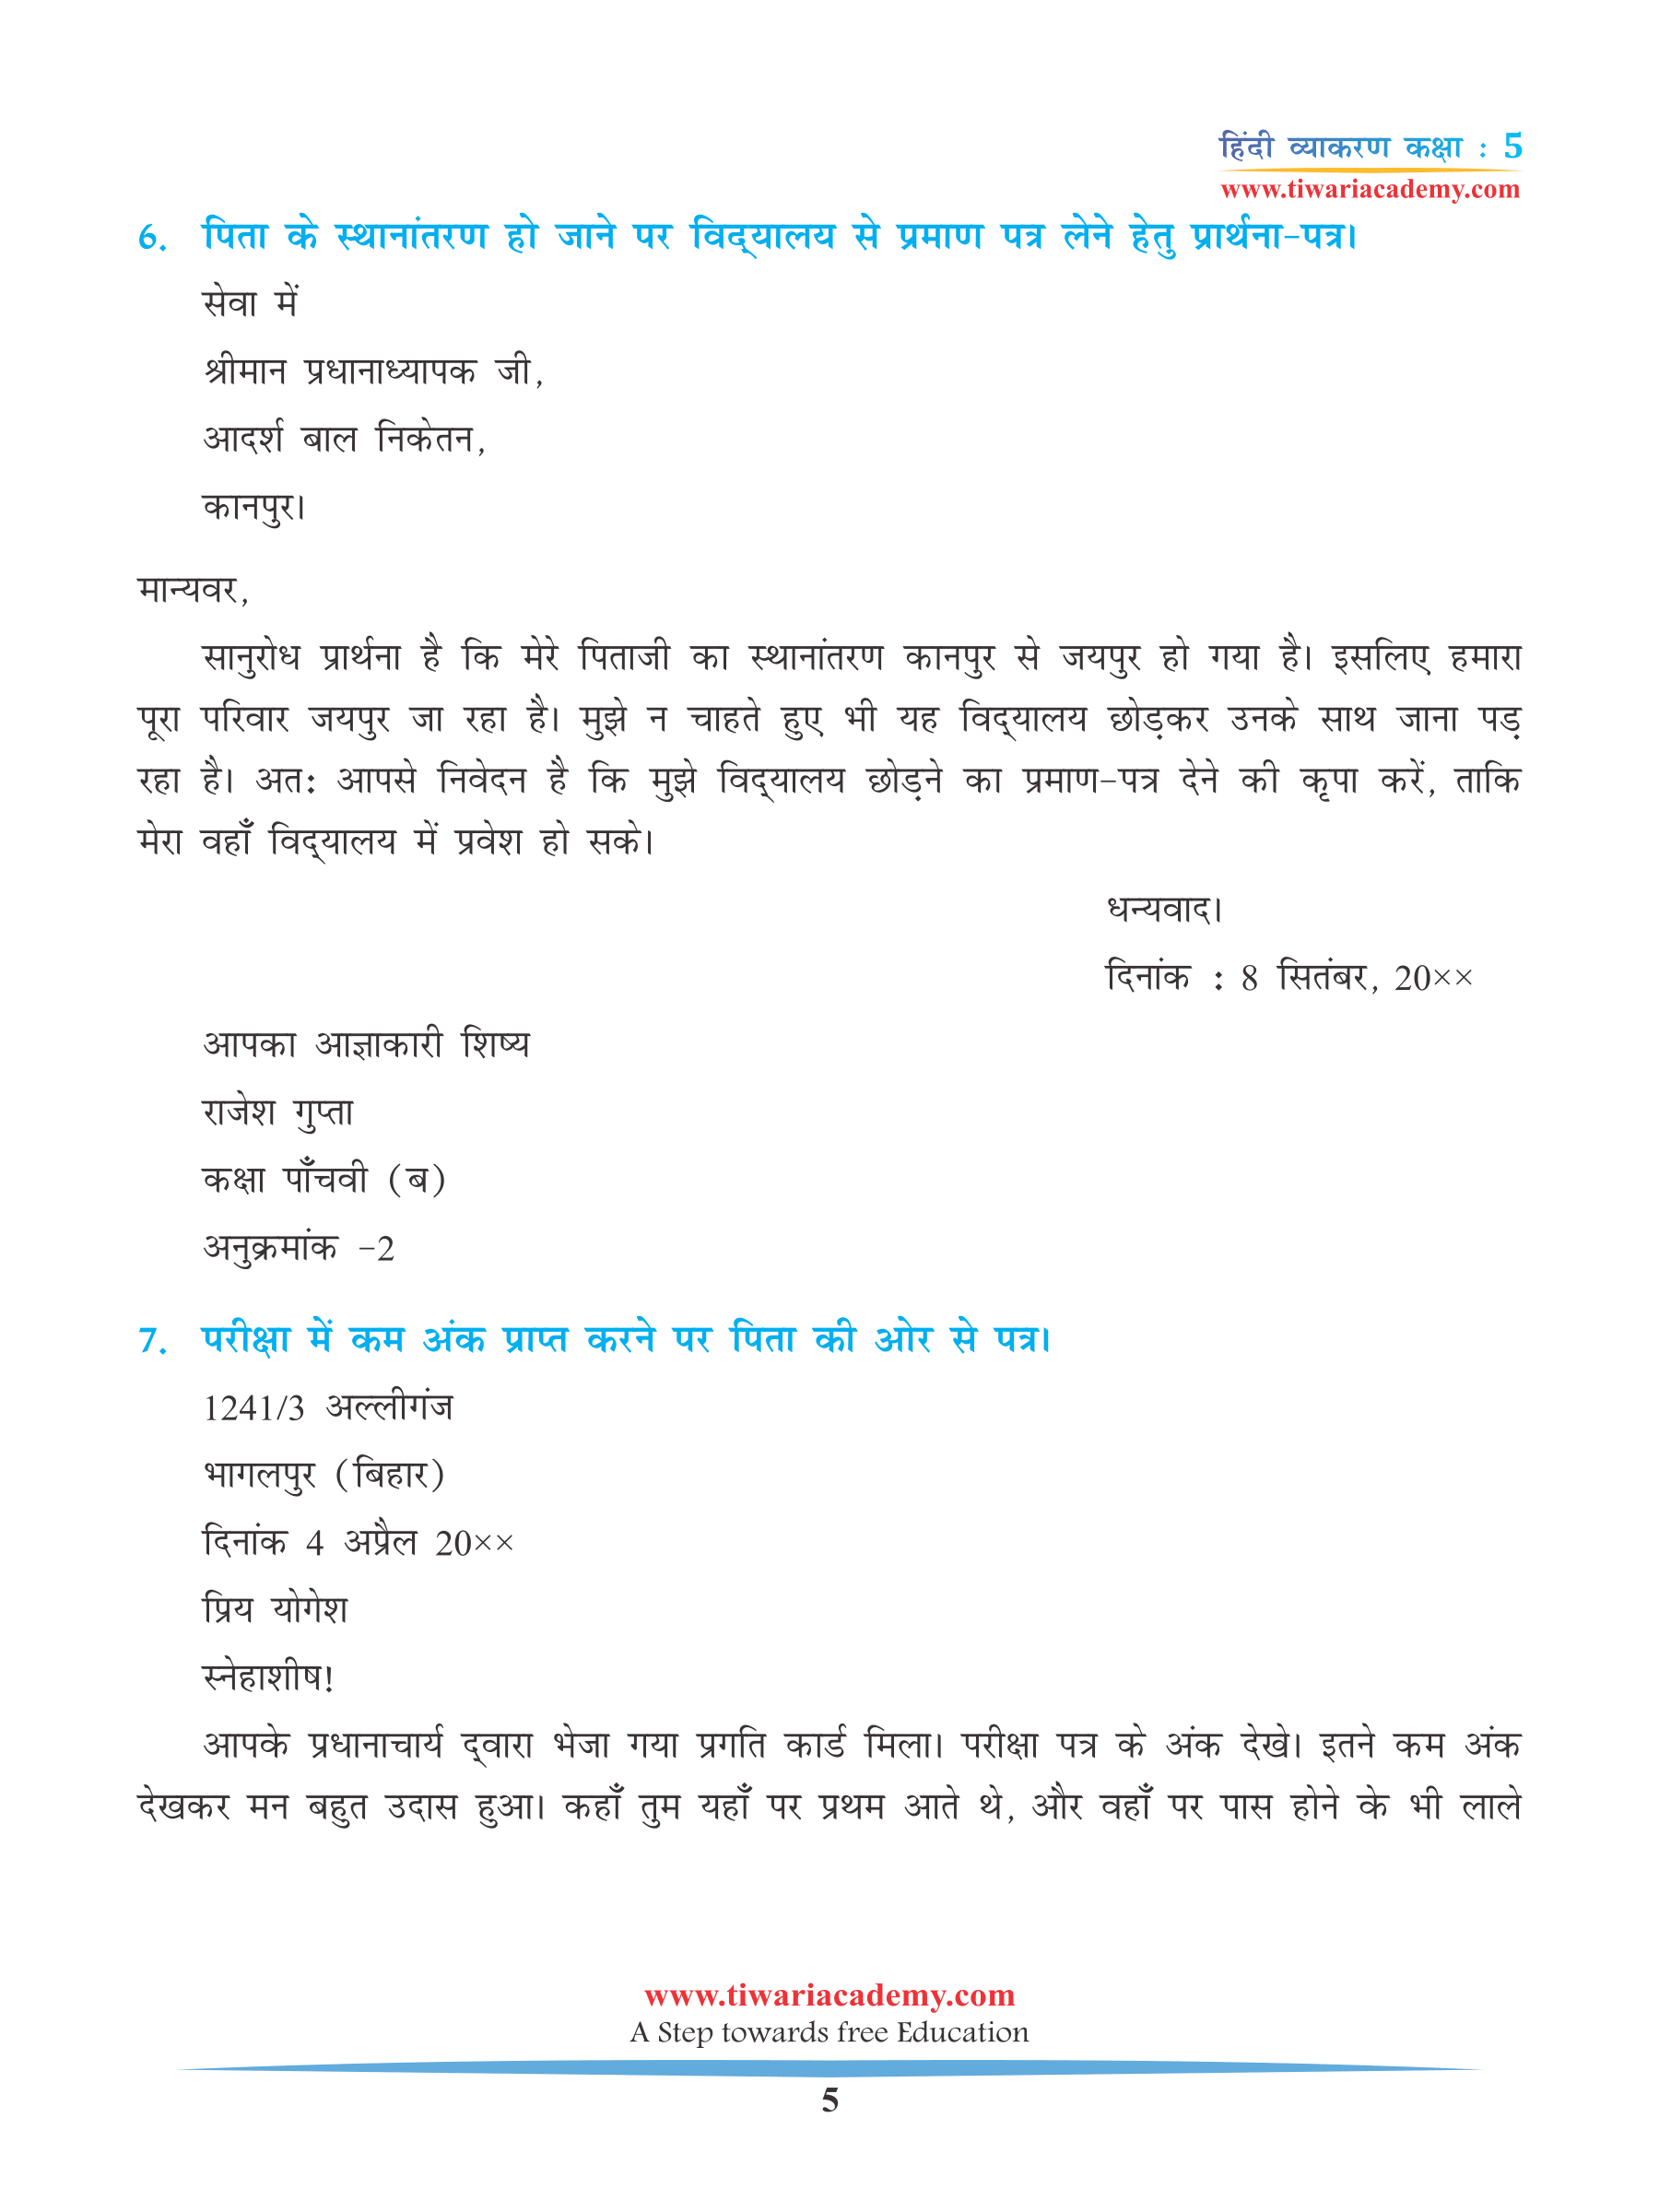 NCERT Solutions for Class 5 Hindi Grammar Chapter 20 for up board